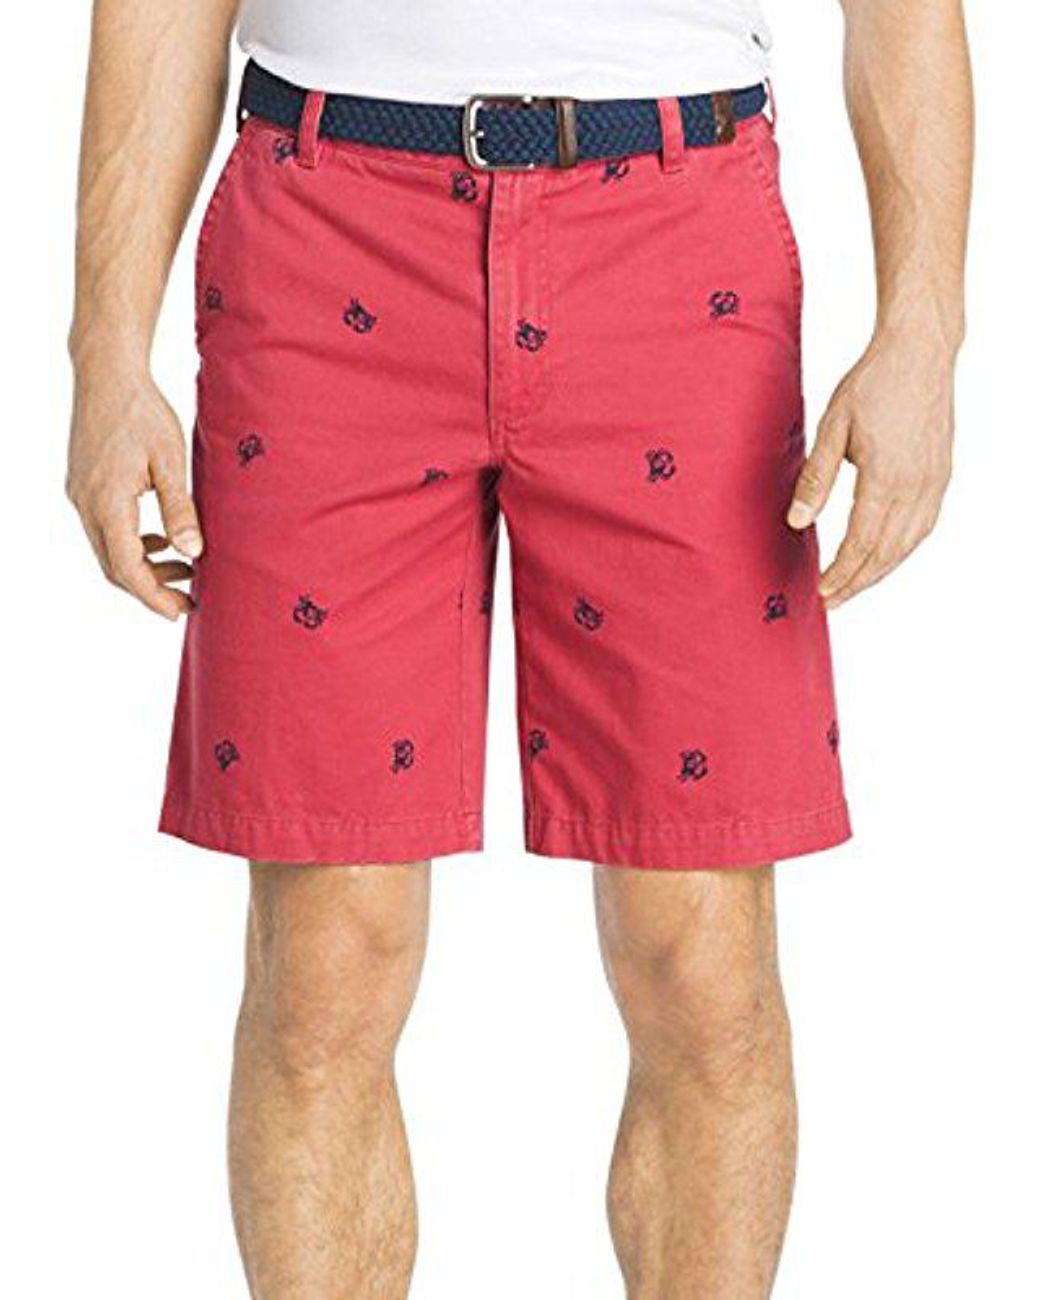 Lyst - Izod Saltwater Flat Front Shorts in Red for Men